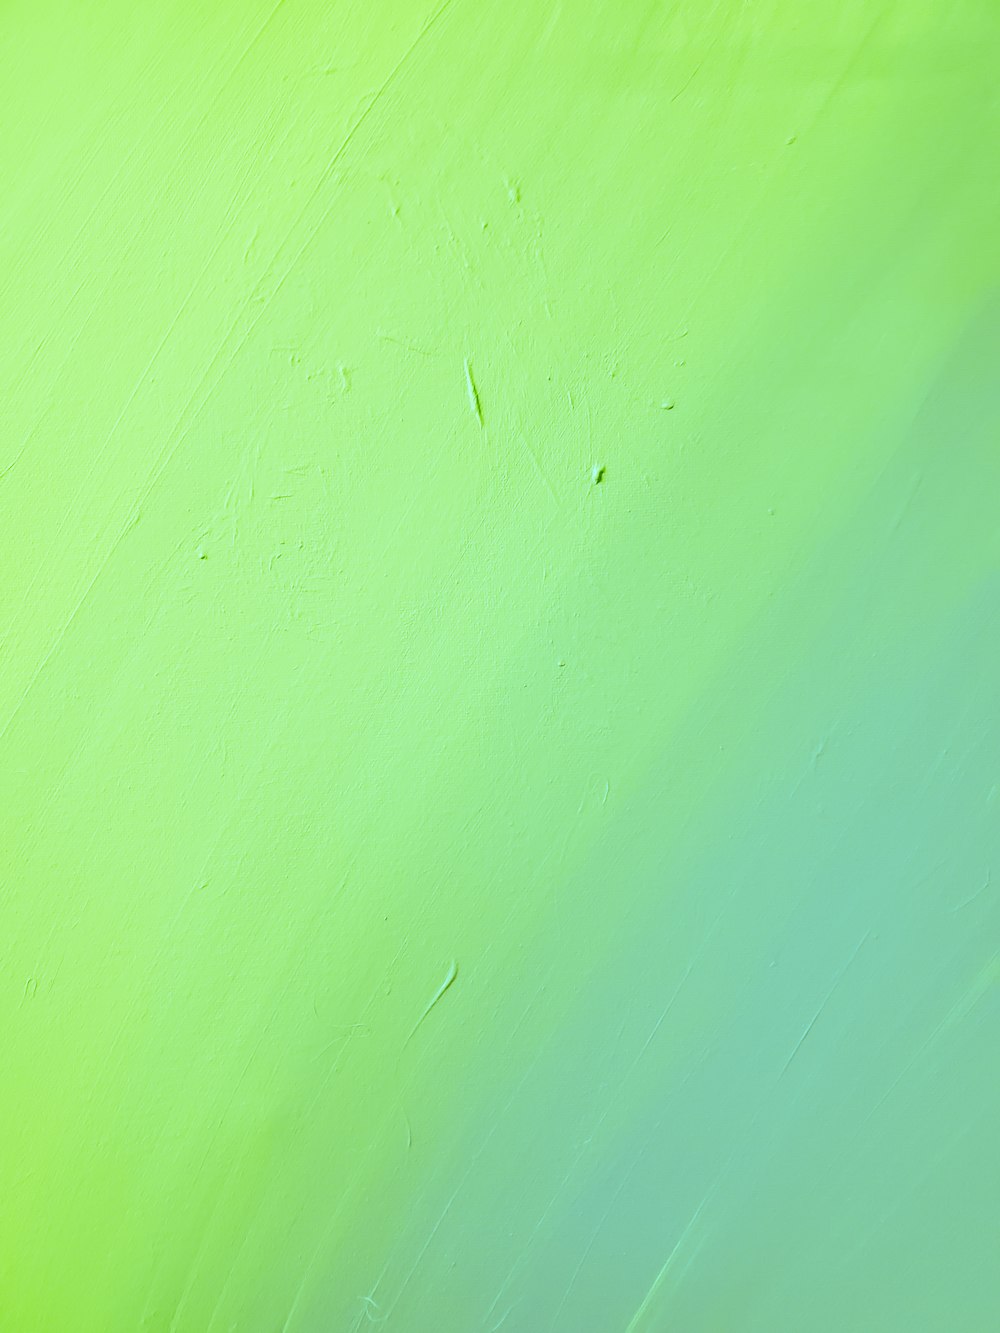 solid lime green background